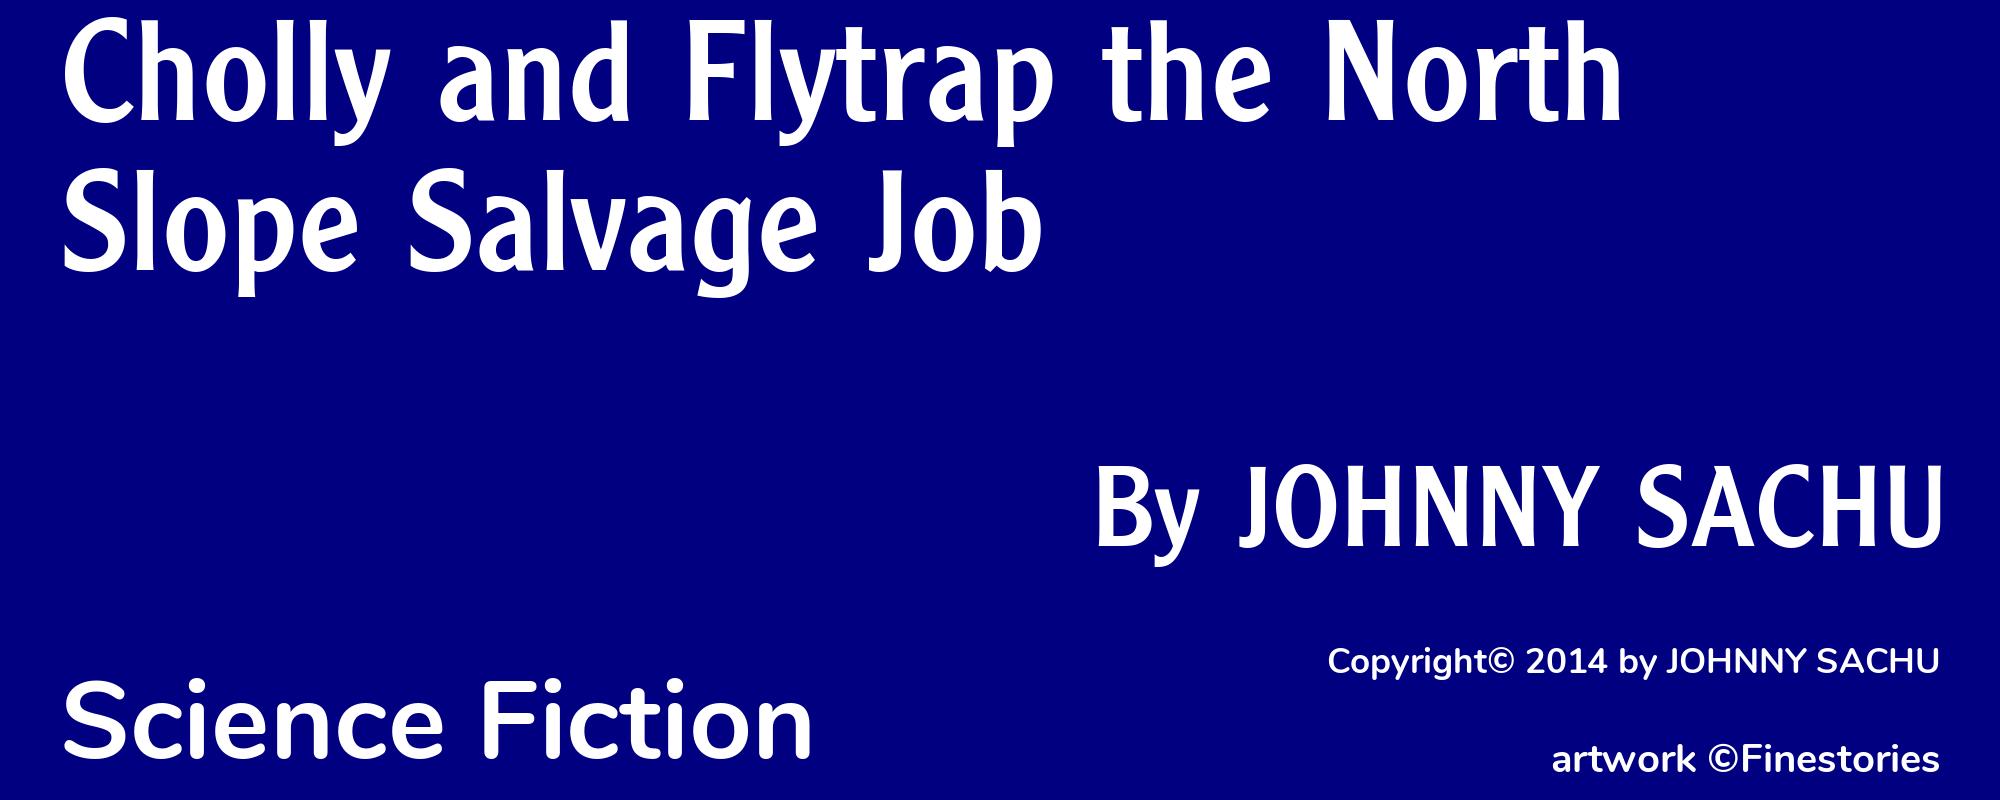 Cholly and Flytrap the North Slope Salvage Job - Cover